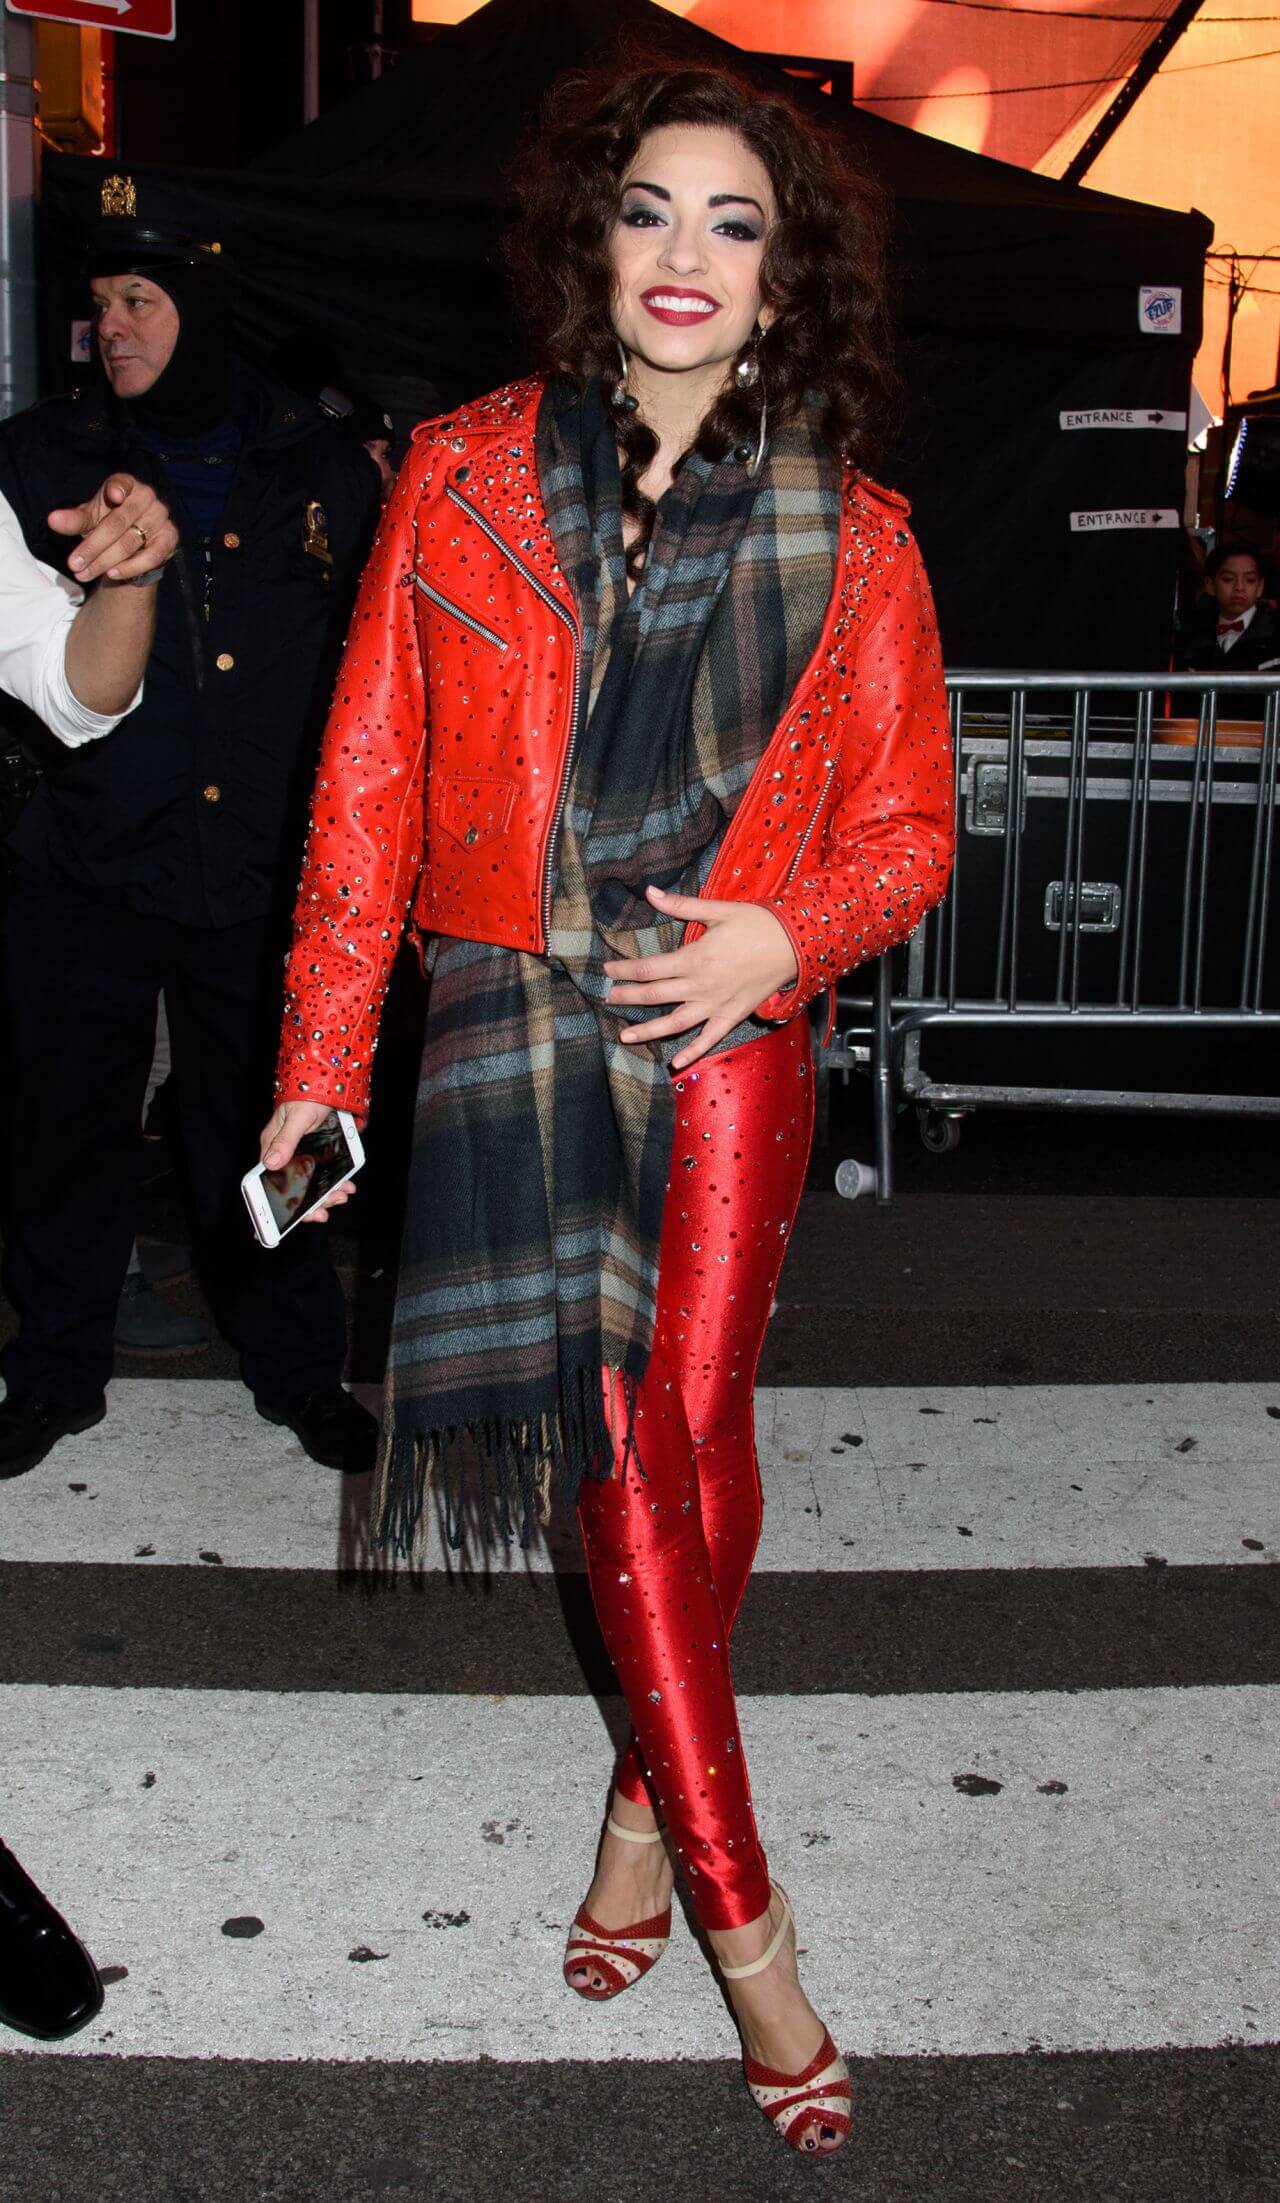  Ana Villafane In Red Sparkling Leather Jacket & Pants With Shawl Outfits at Times Square New Year's Eve  in NYC